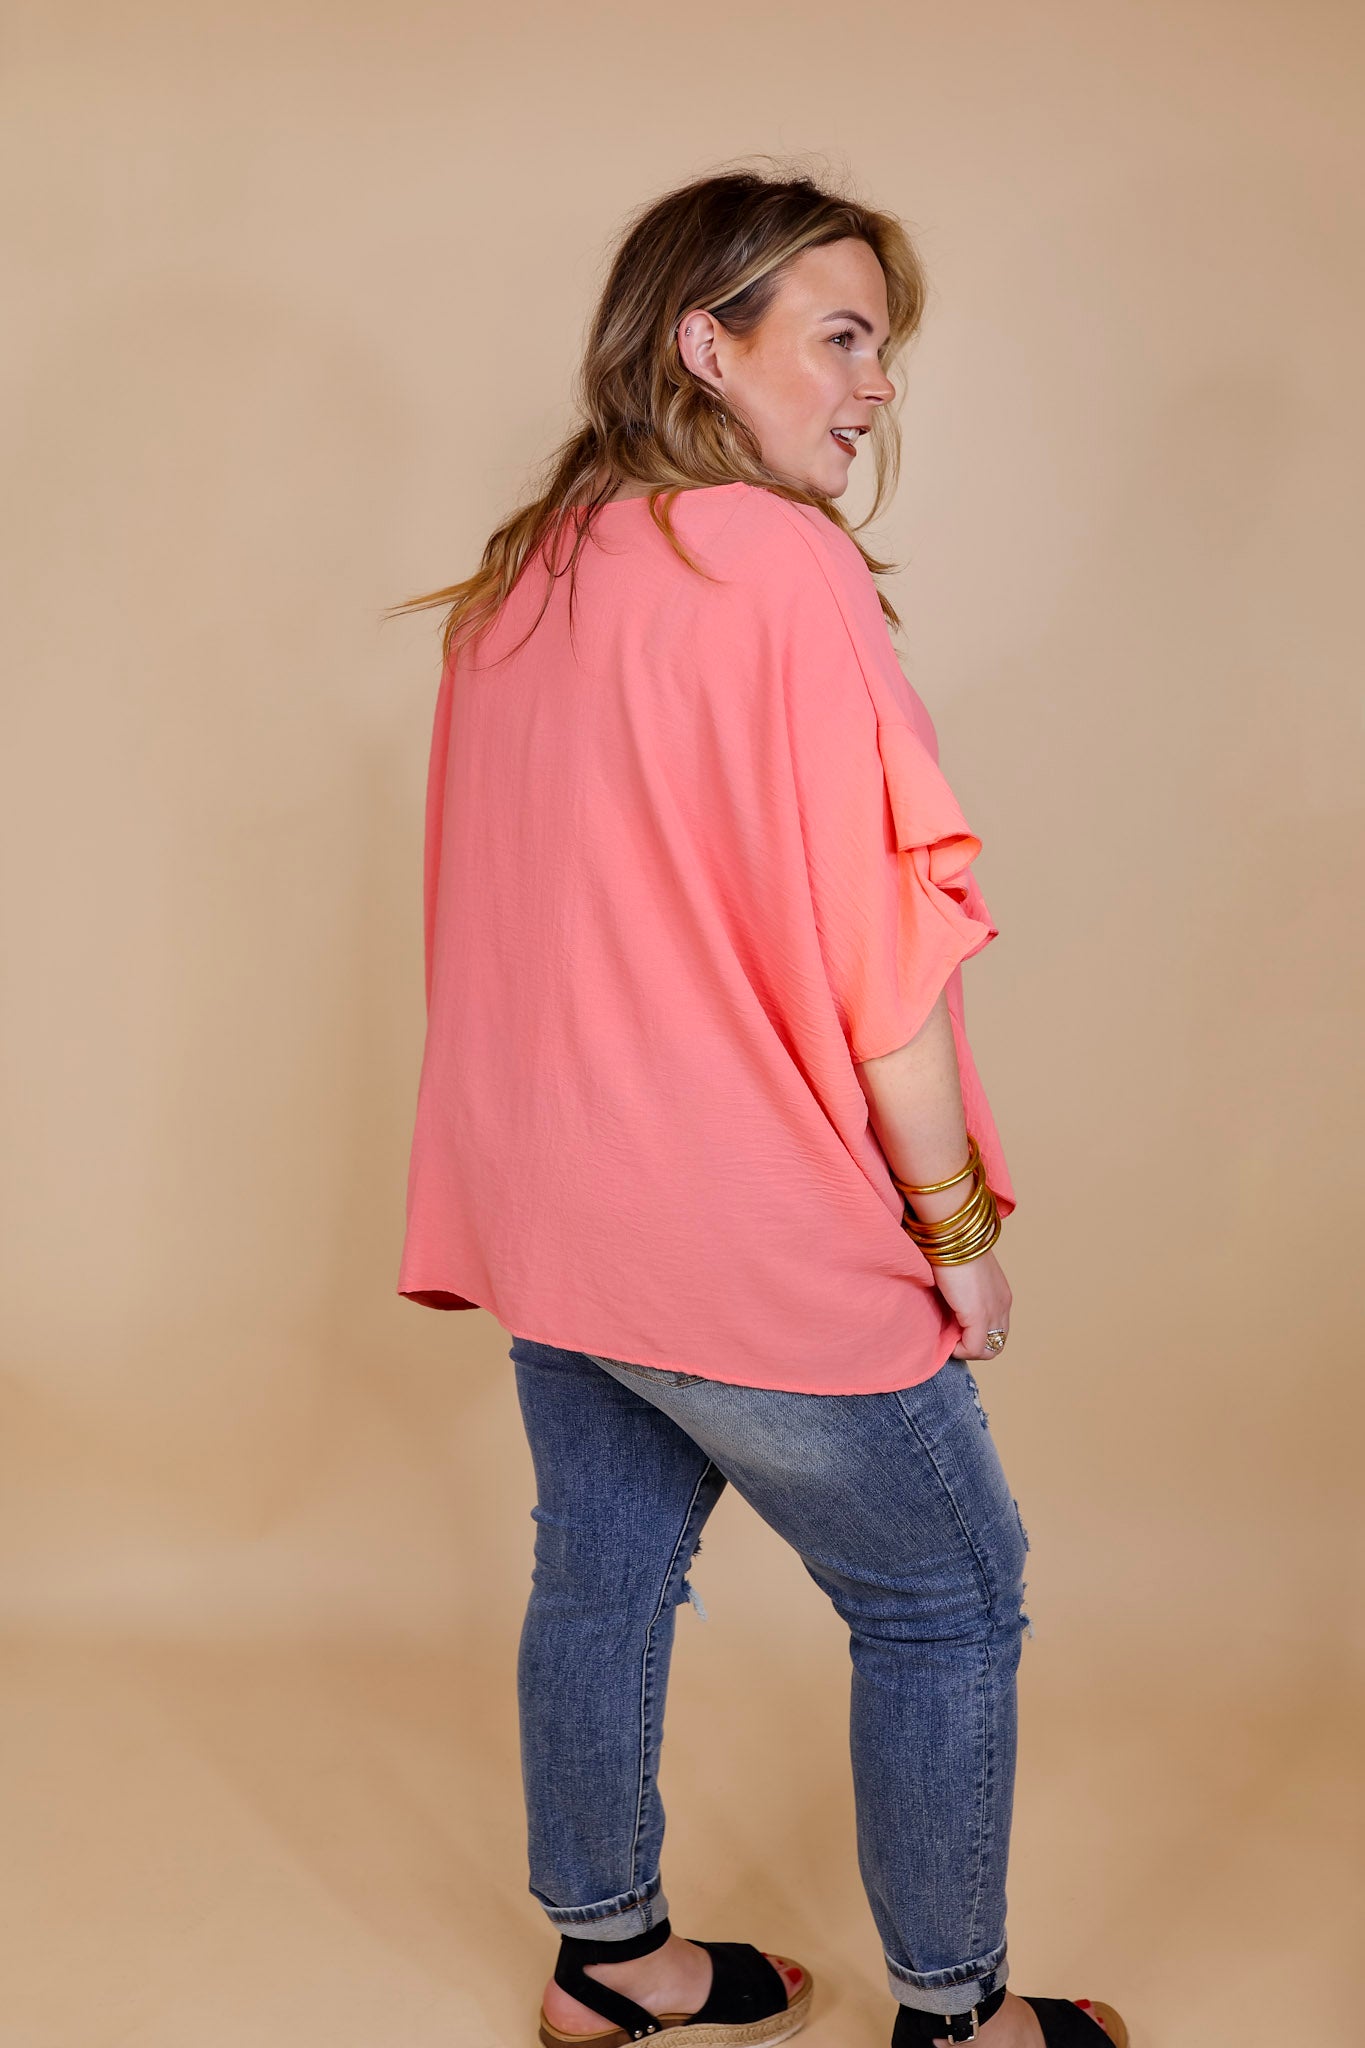 Sip of Spring Ruffle Sleeve Shift Top with V Neckline in Coral Orange - Giddy Up Glamour Boutique